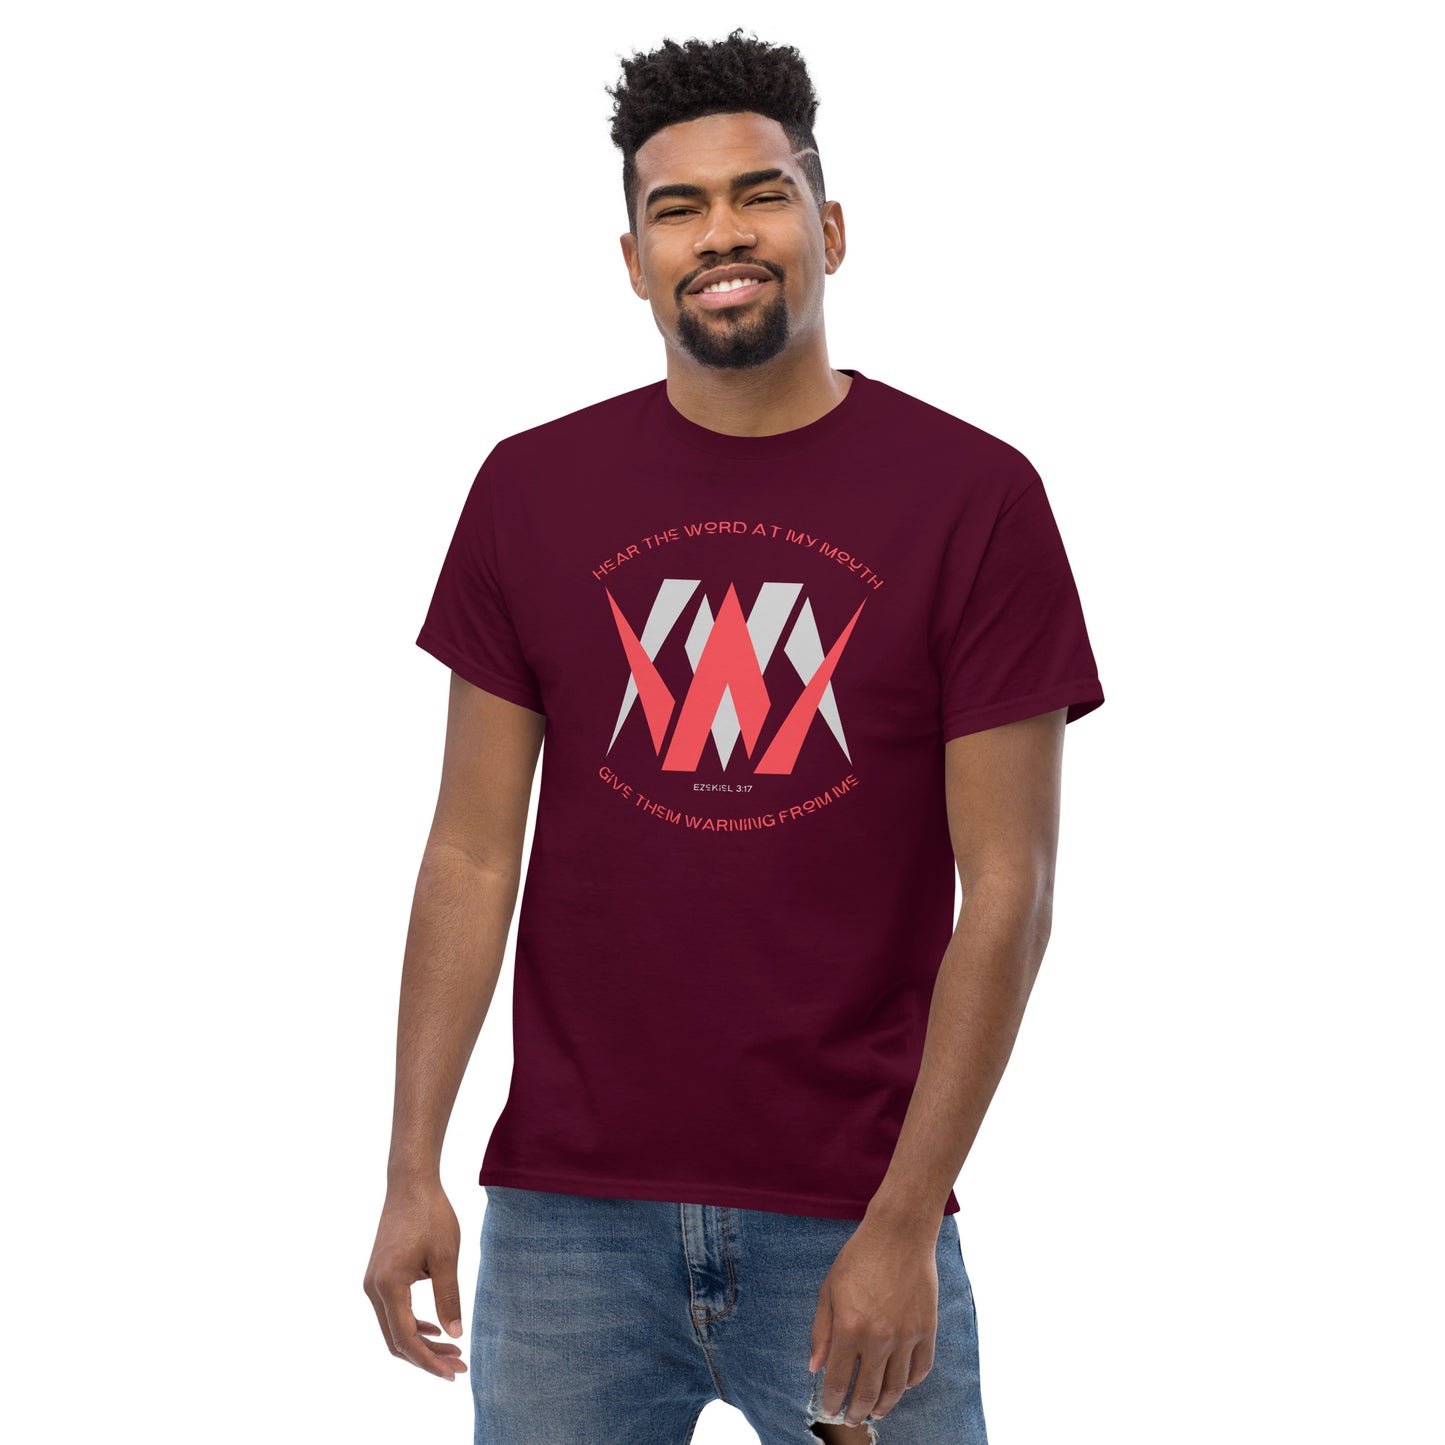 WM Hear The Word At My Mouth Give Them Warning From Me Men's classic tee